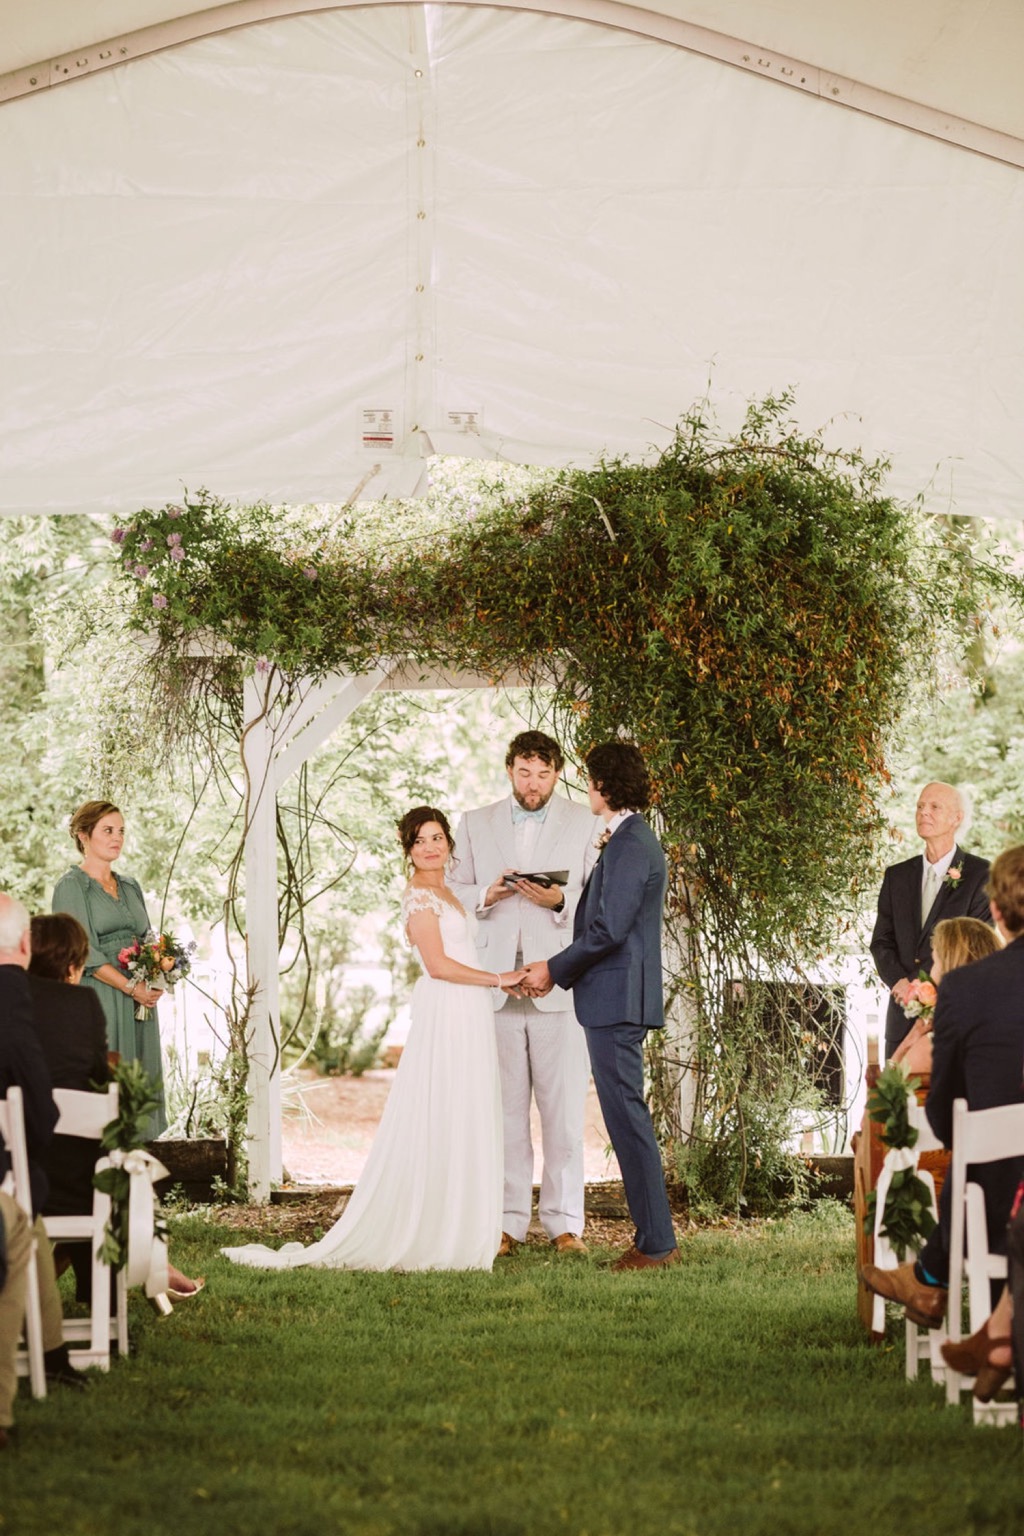 ceremony details at southern family farm wedding